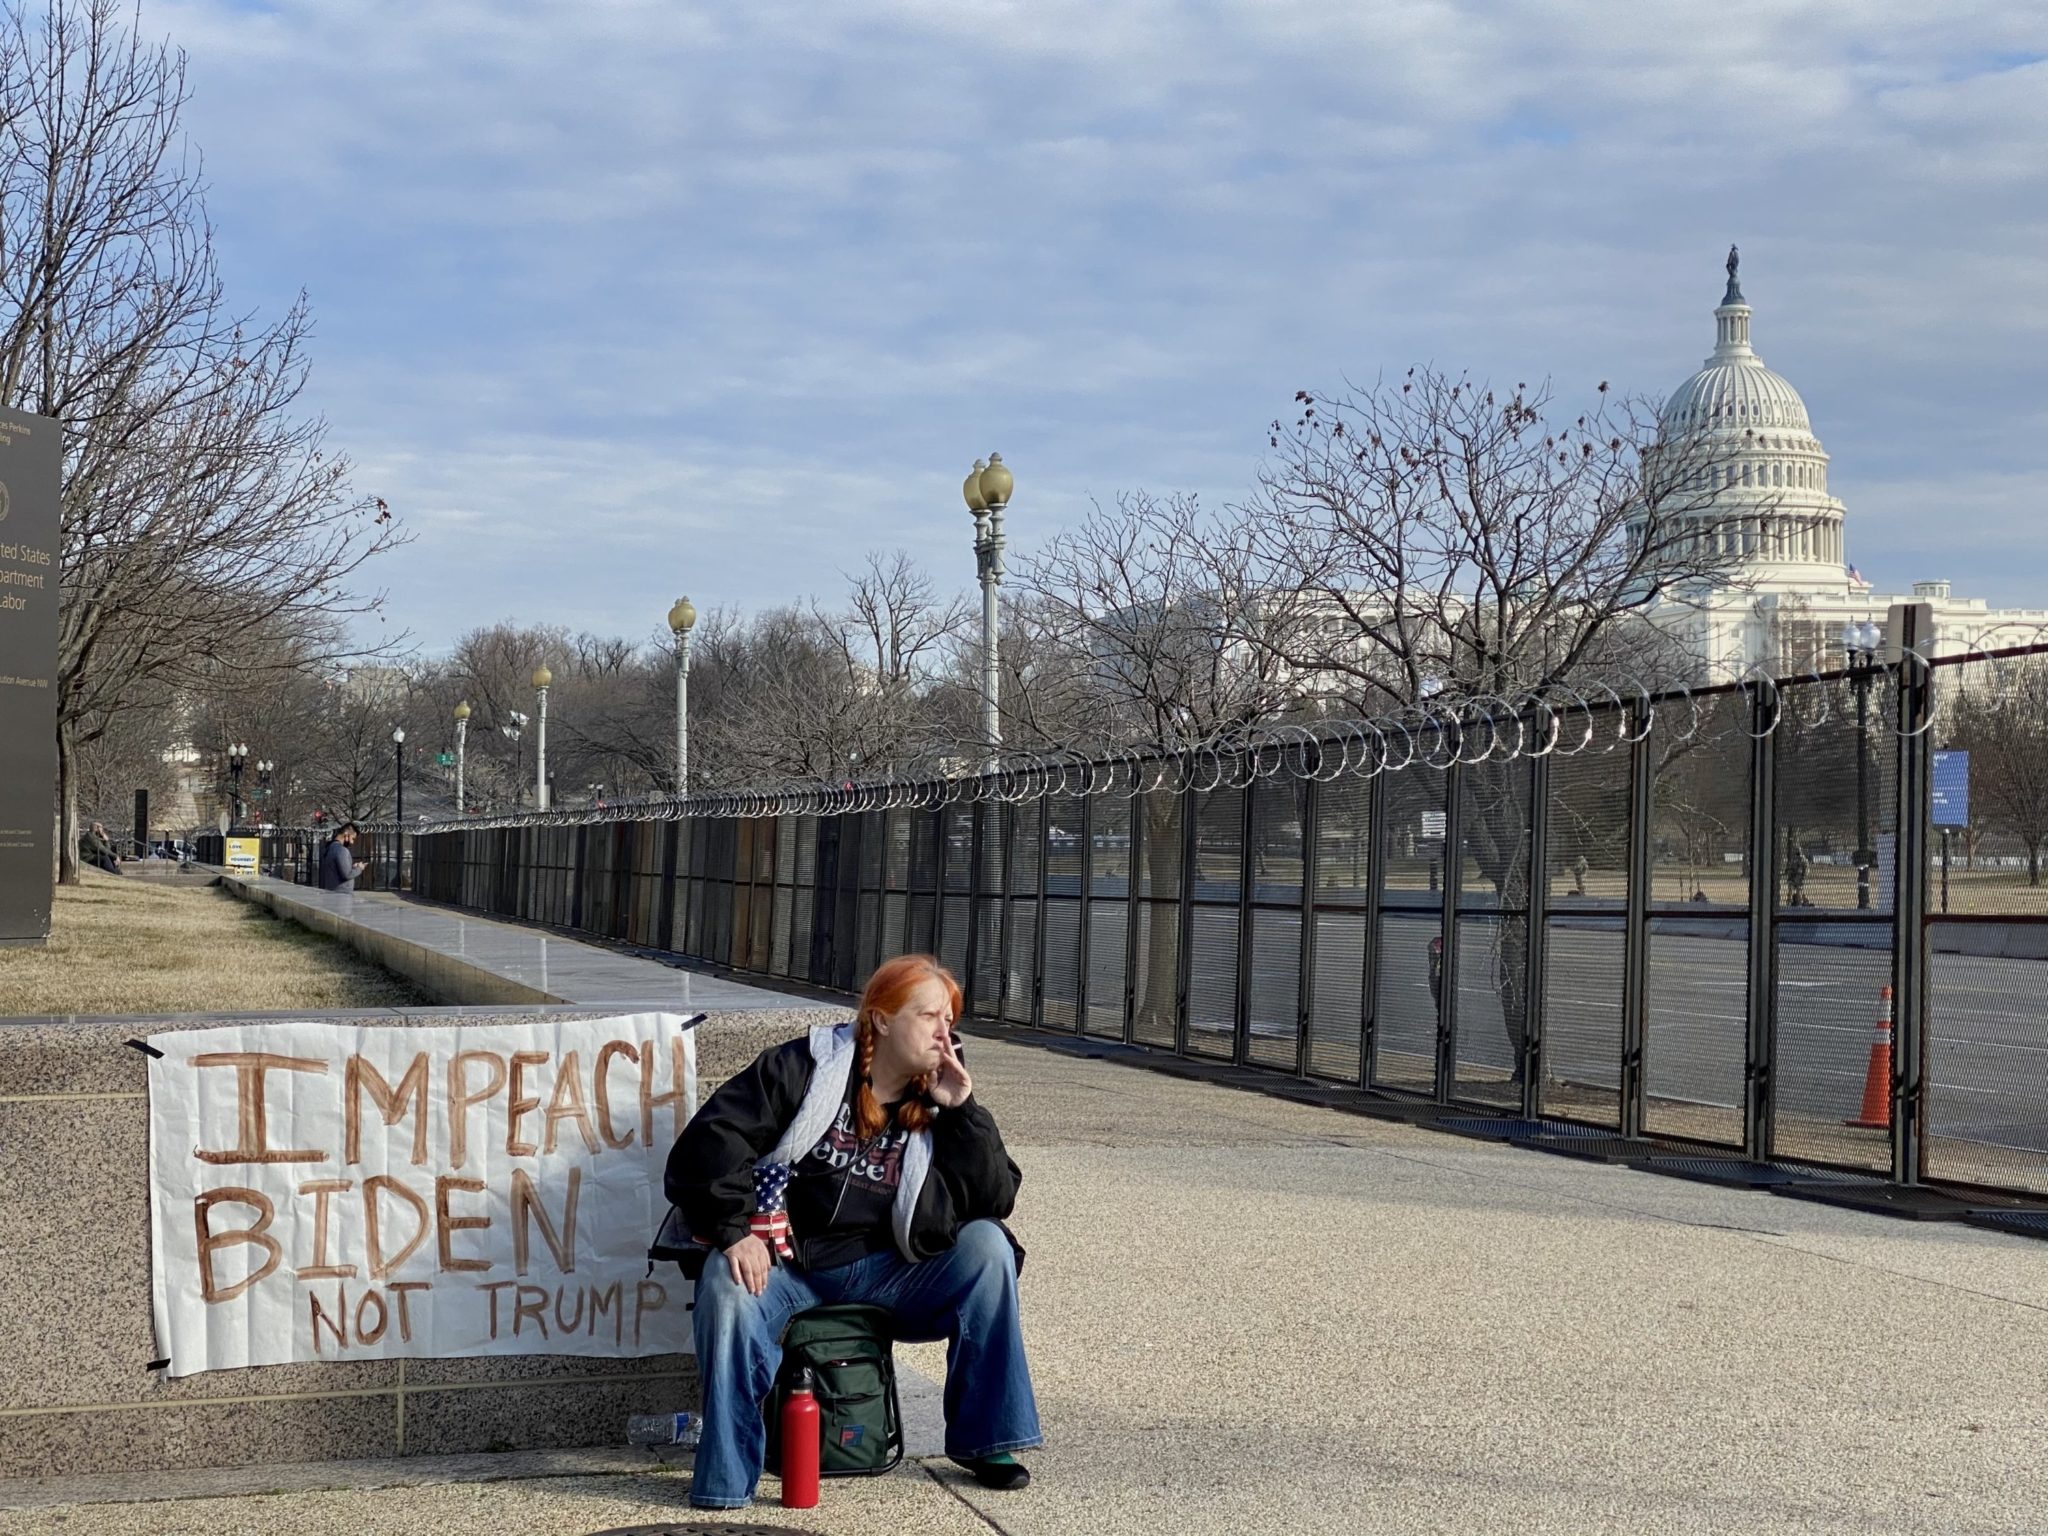 PHOTOS: Outside the US Capitol on Day 1 of Trump’s Senate Impeachment Trial